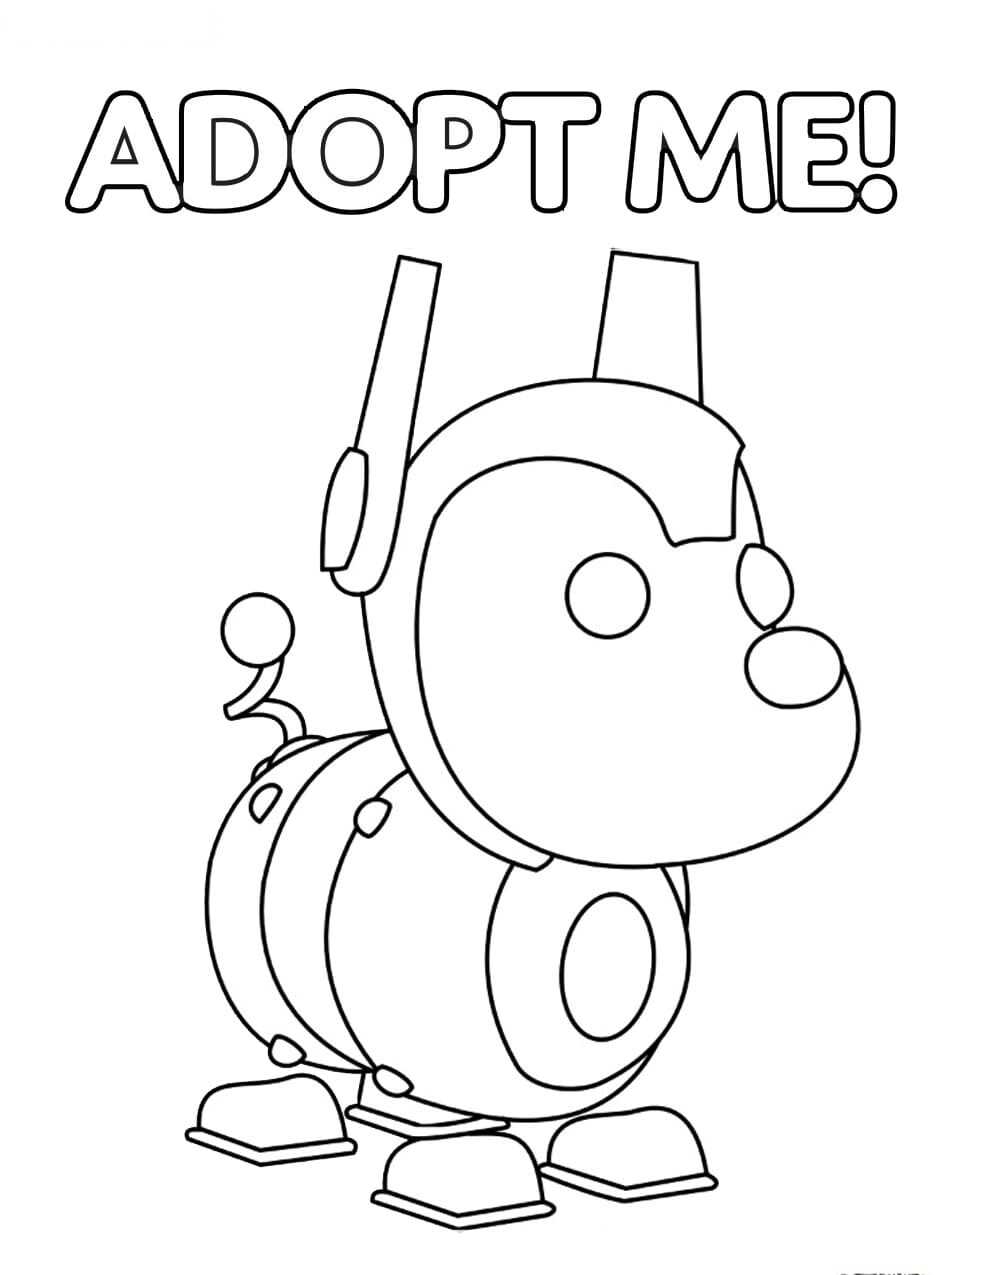 The mechanical dog named Robo Dog from Adopt me Coloring Pages - Adopt me Coloring  Pages - Coloring Pages For Kids And Adults